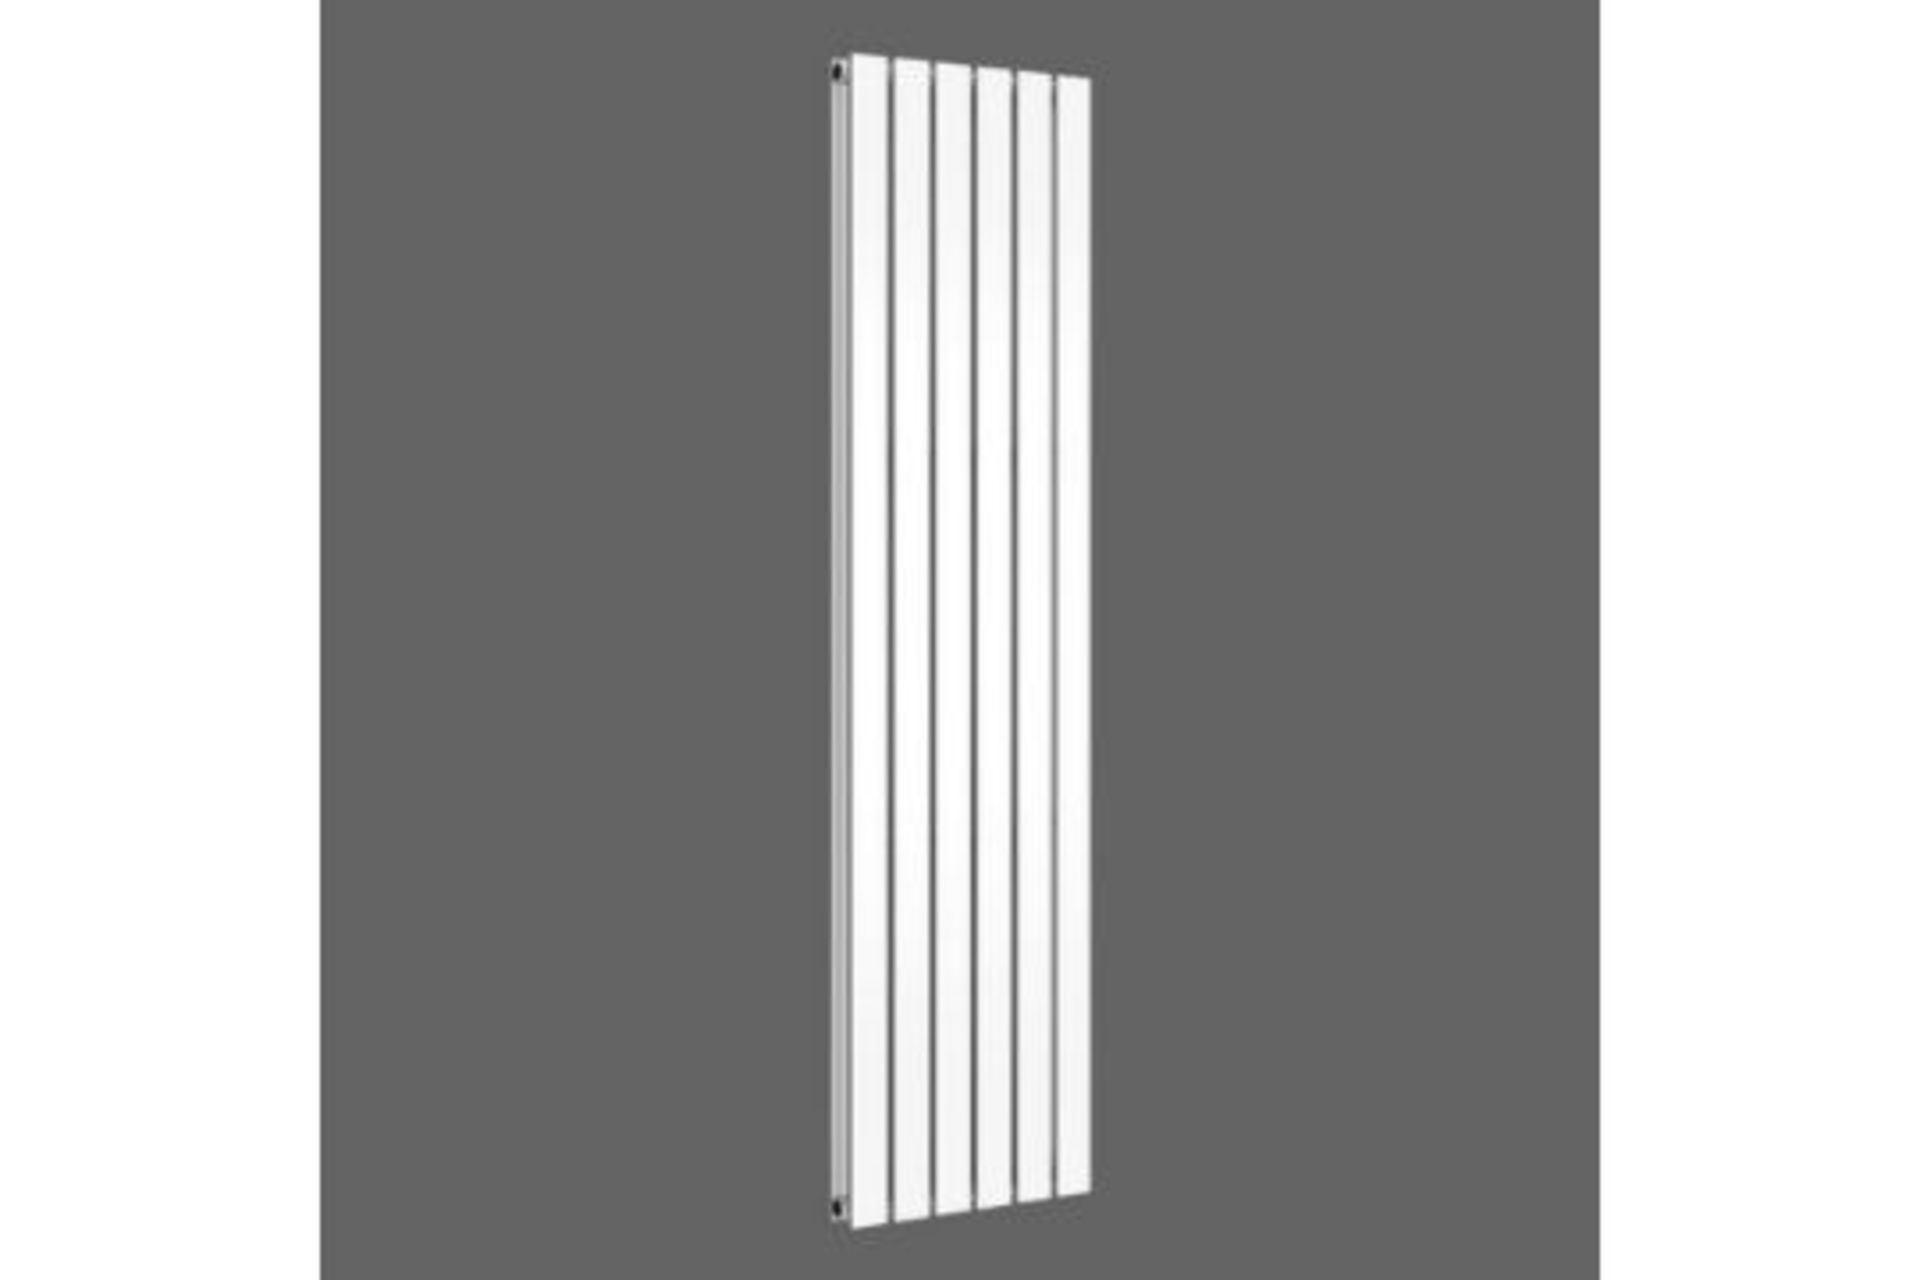 NEW & BOXED 1800x452mm Gloss White Double Flat Panel Vertical Radiator.RRP £499.99.We love thi... - Image 2 of 2